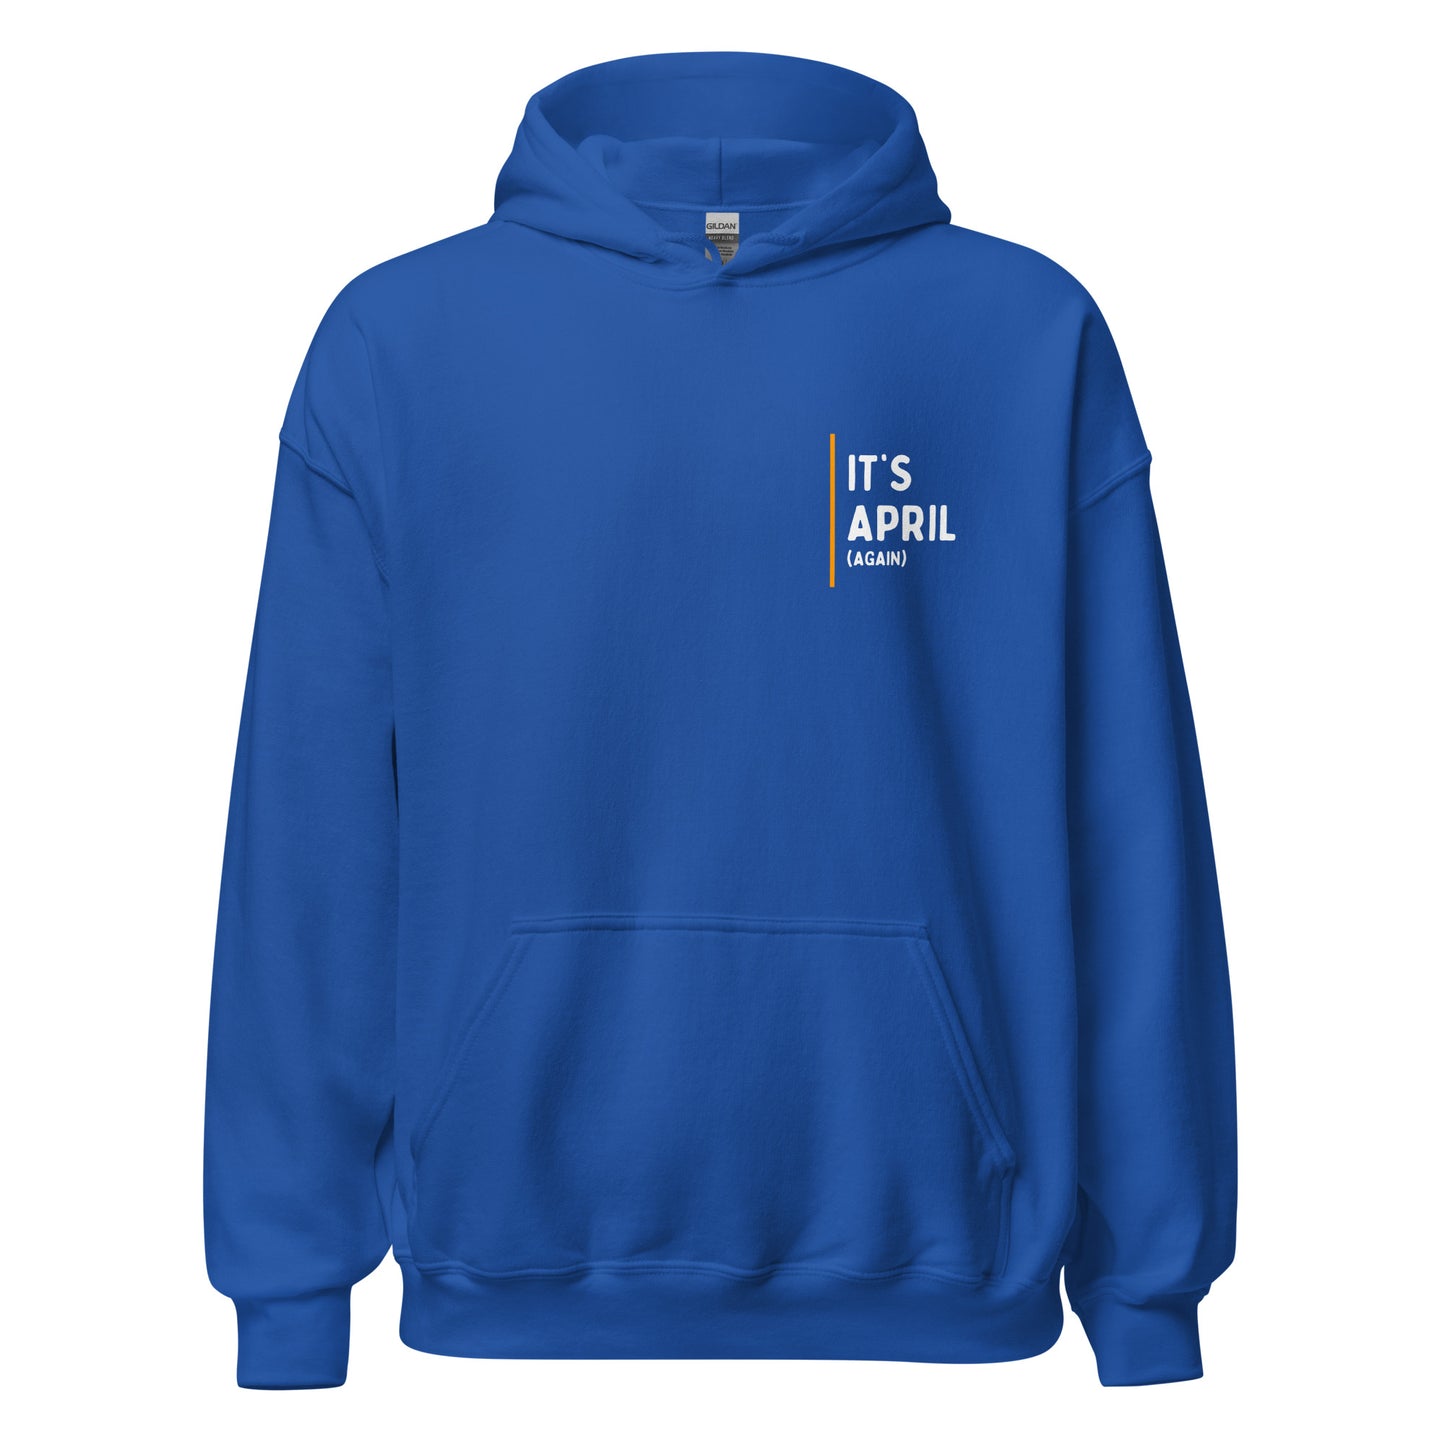 The "Protected Paws" Advocacy Against Animal Cruelty Hoodie